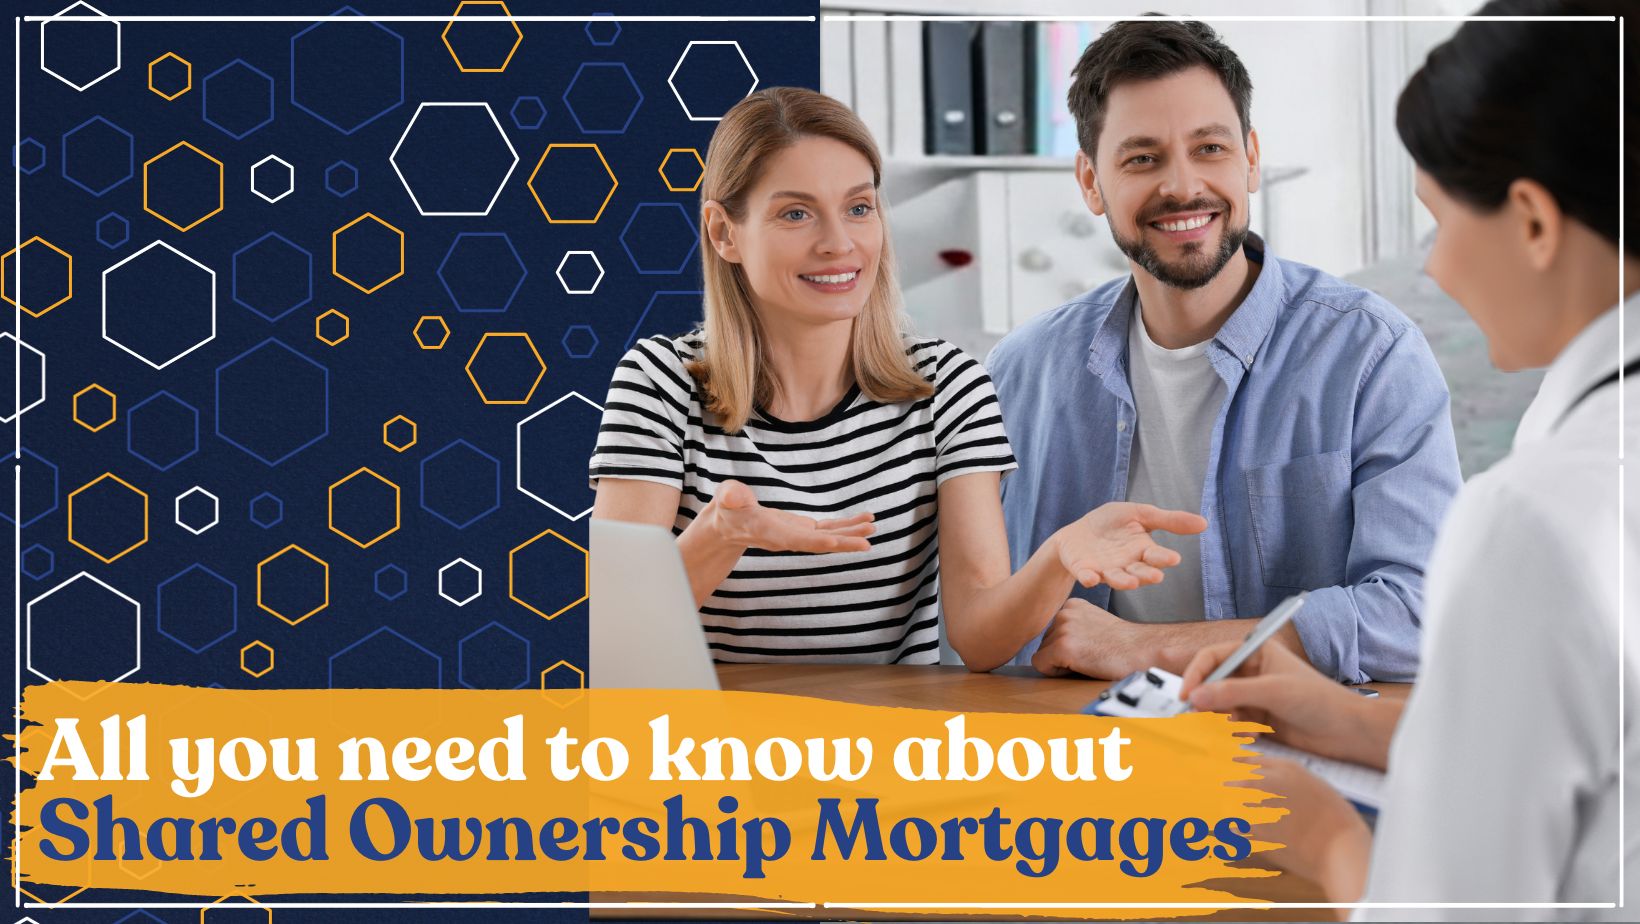 All you need to know about shared ownership mortgages    image